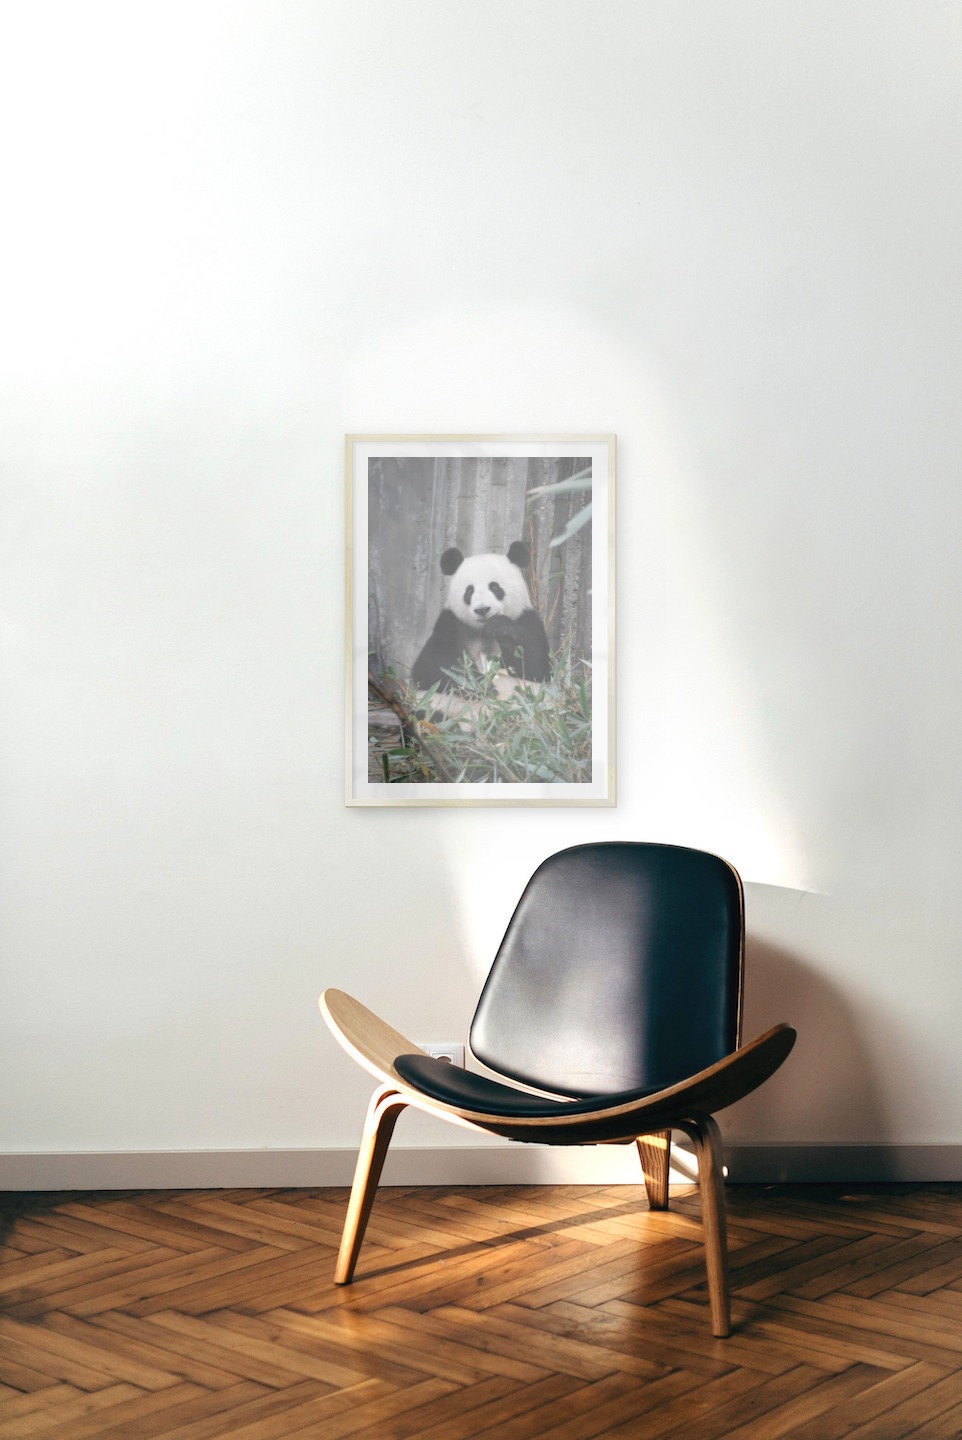 Gallery wall with picture frame in gold in size 50x70 with print "Panda"